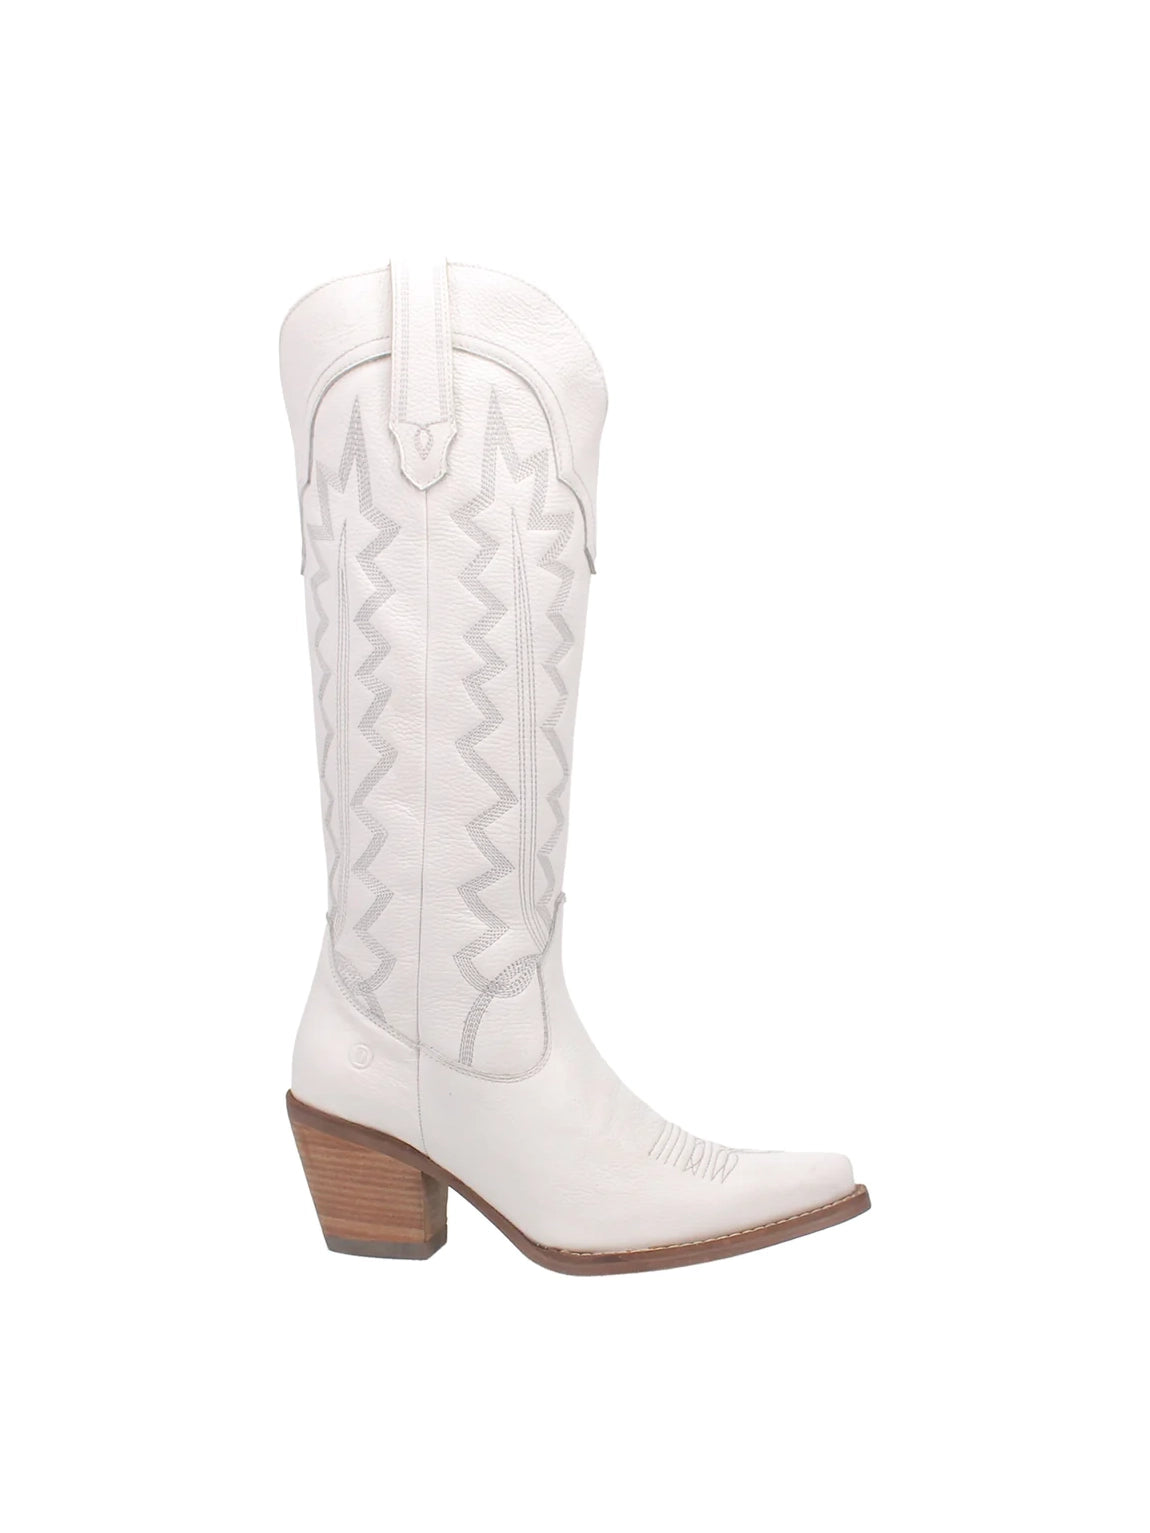 dingo 1969 high cotton tall leather white cowboy boots in white